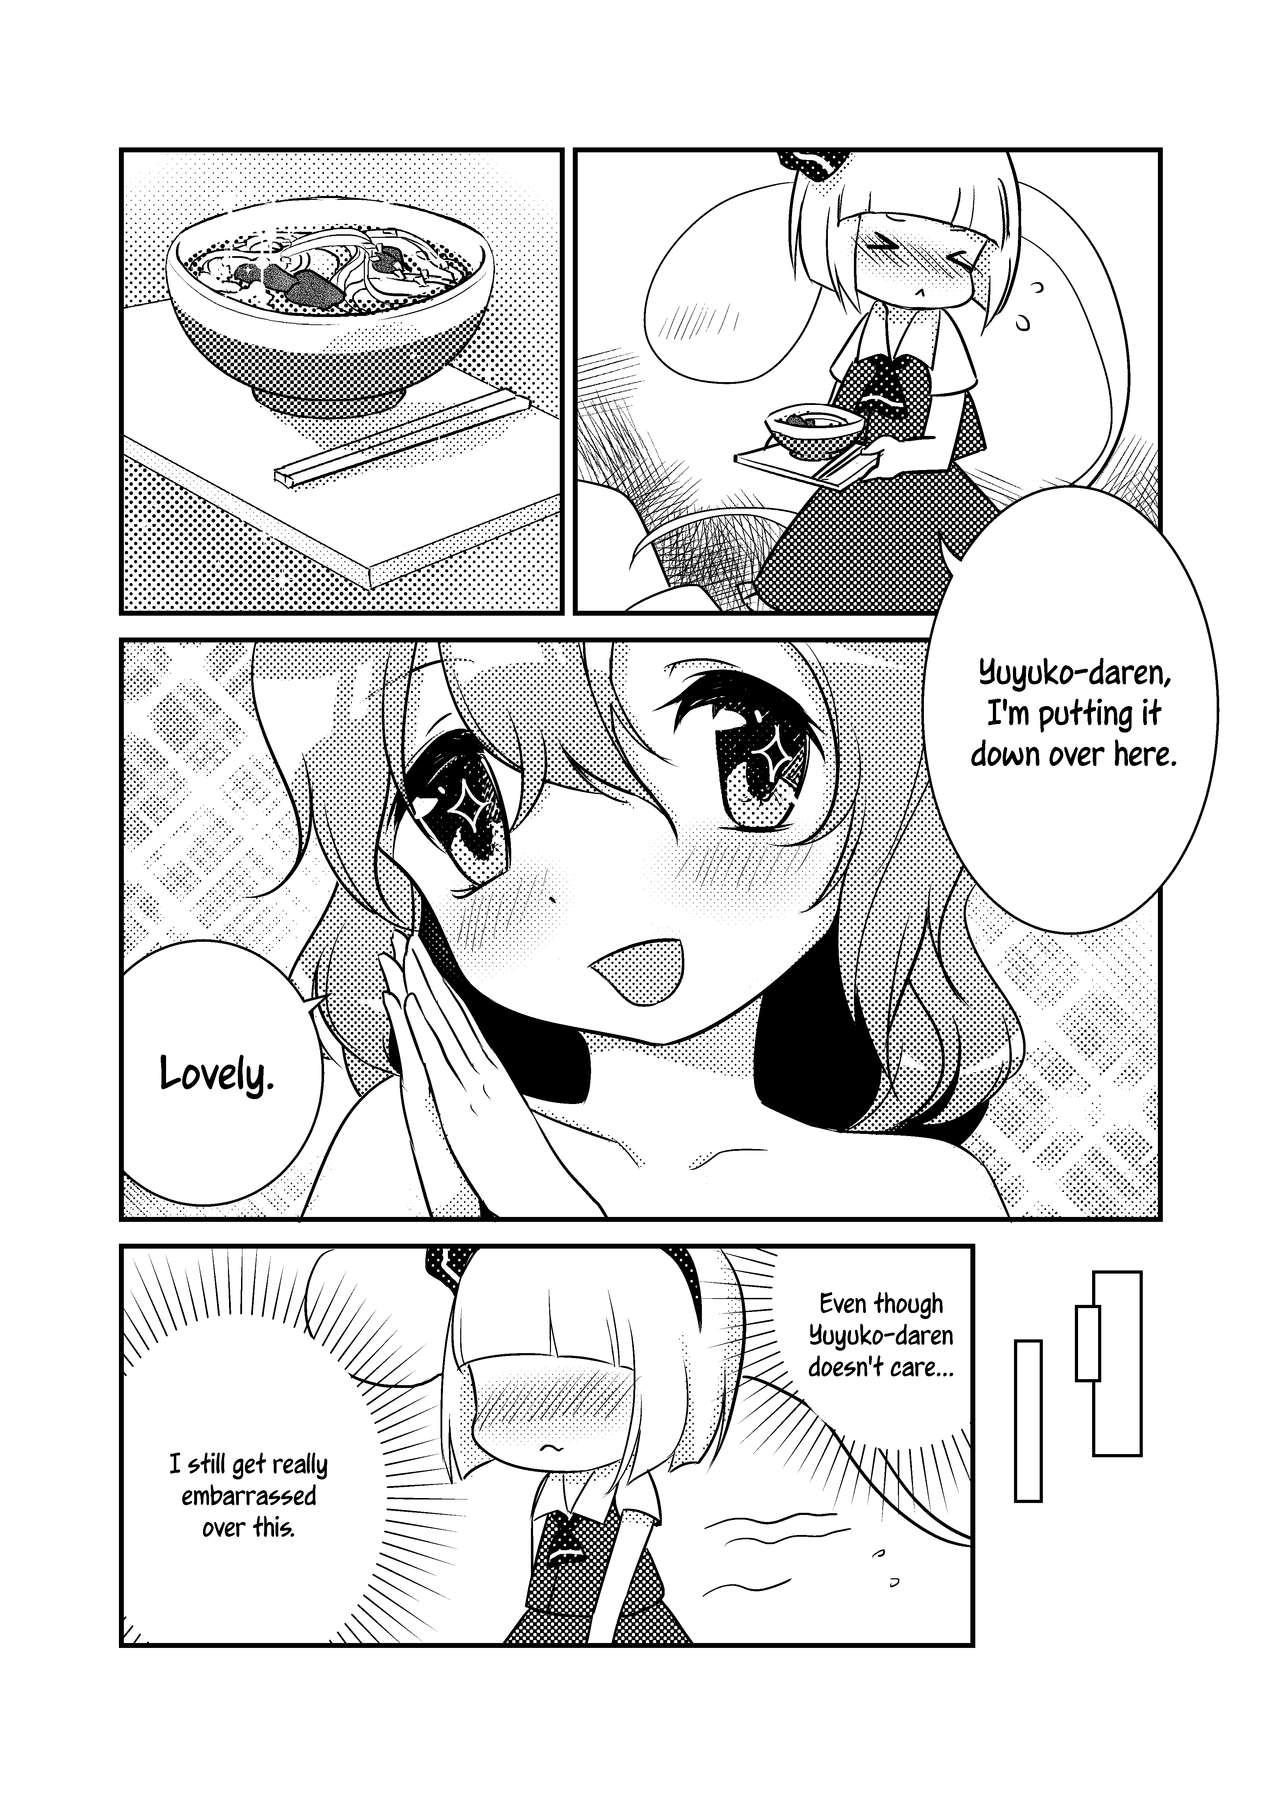 European ????一起泡温泉吧！ | ????Let's Soak in the Hot Spring! - Touhou project Outside - Page 4